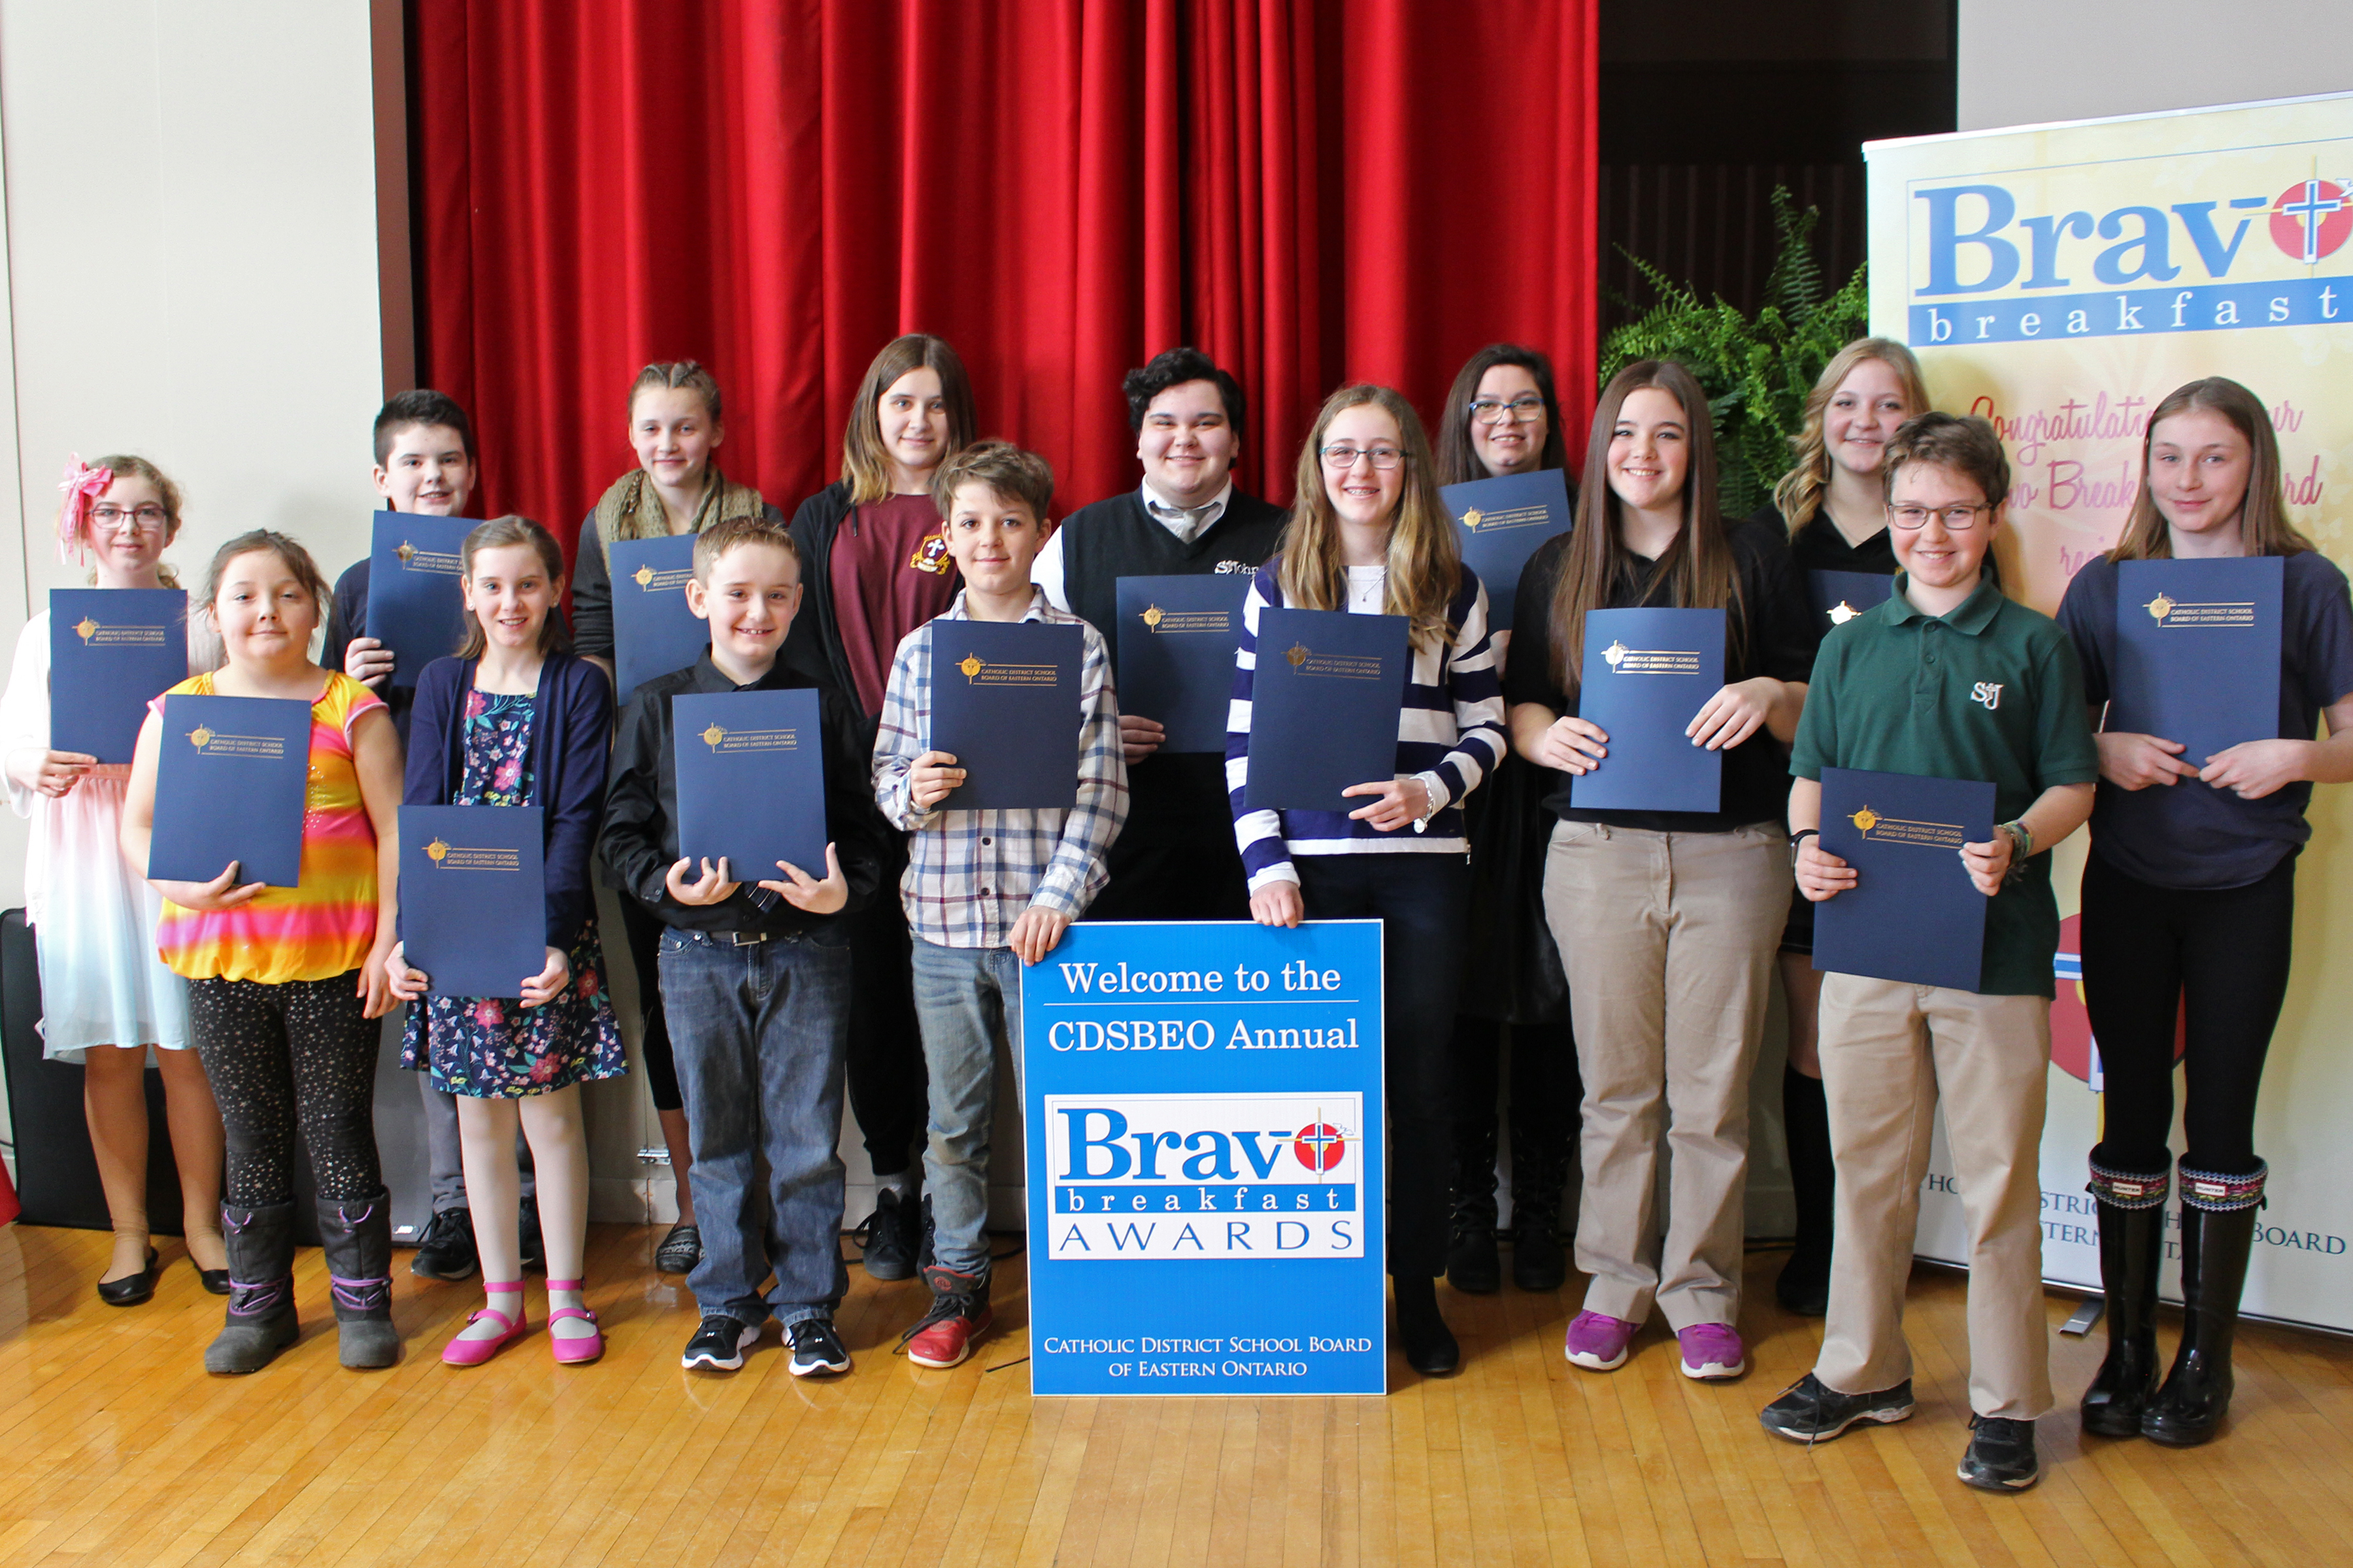 Thumbnail for the post titled: Bravo Breakfast Awards – Smiths Falls Area Schools